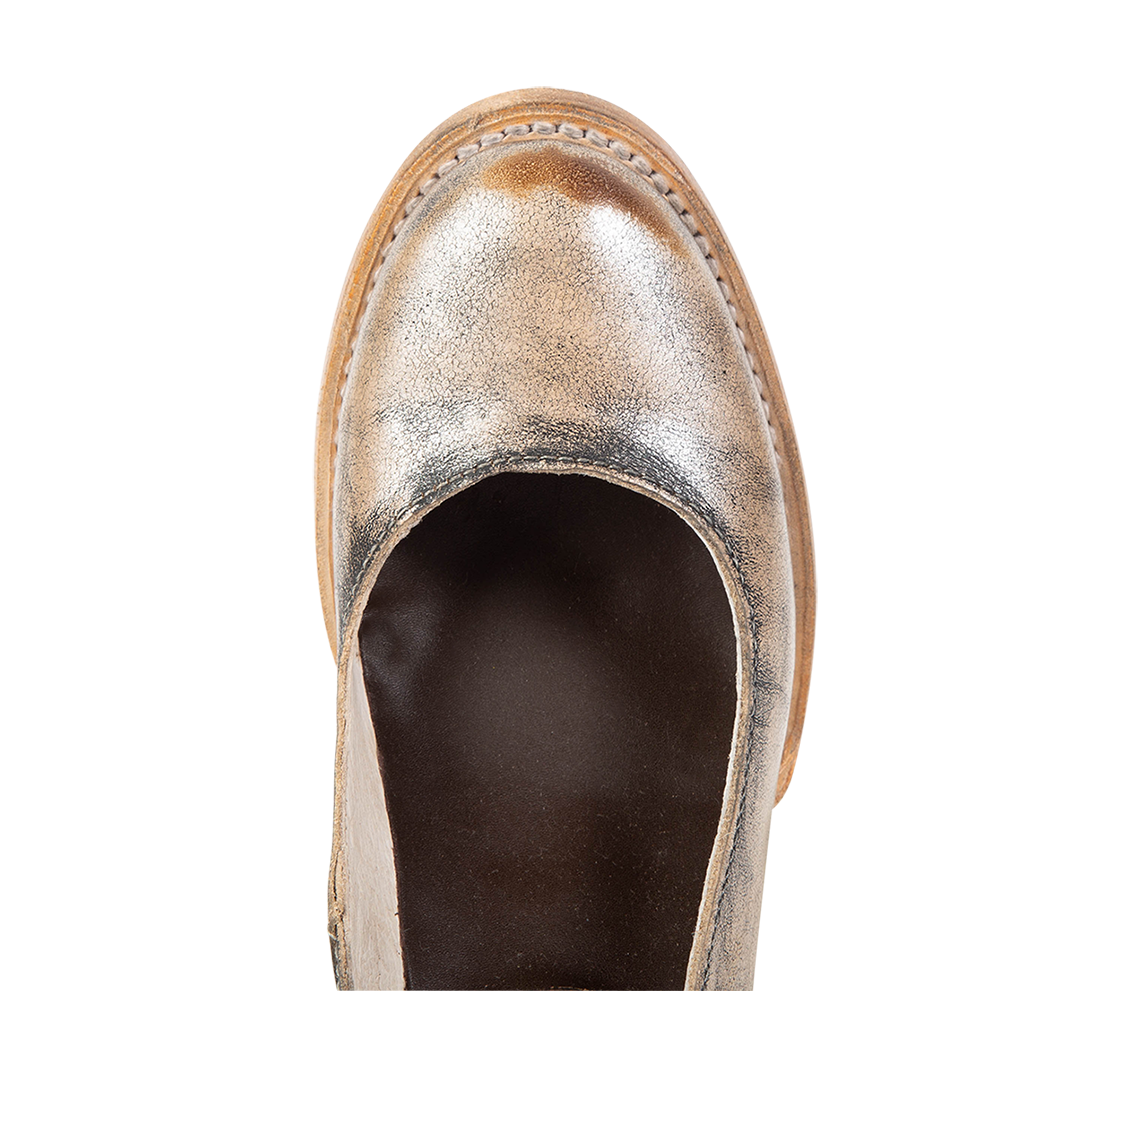 Top view showing round toe and open construction on FREEBIRD women’s Randi pewter shoe